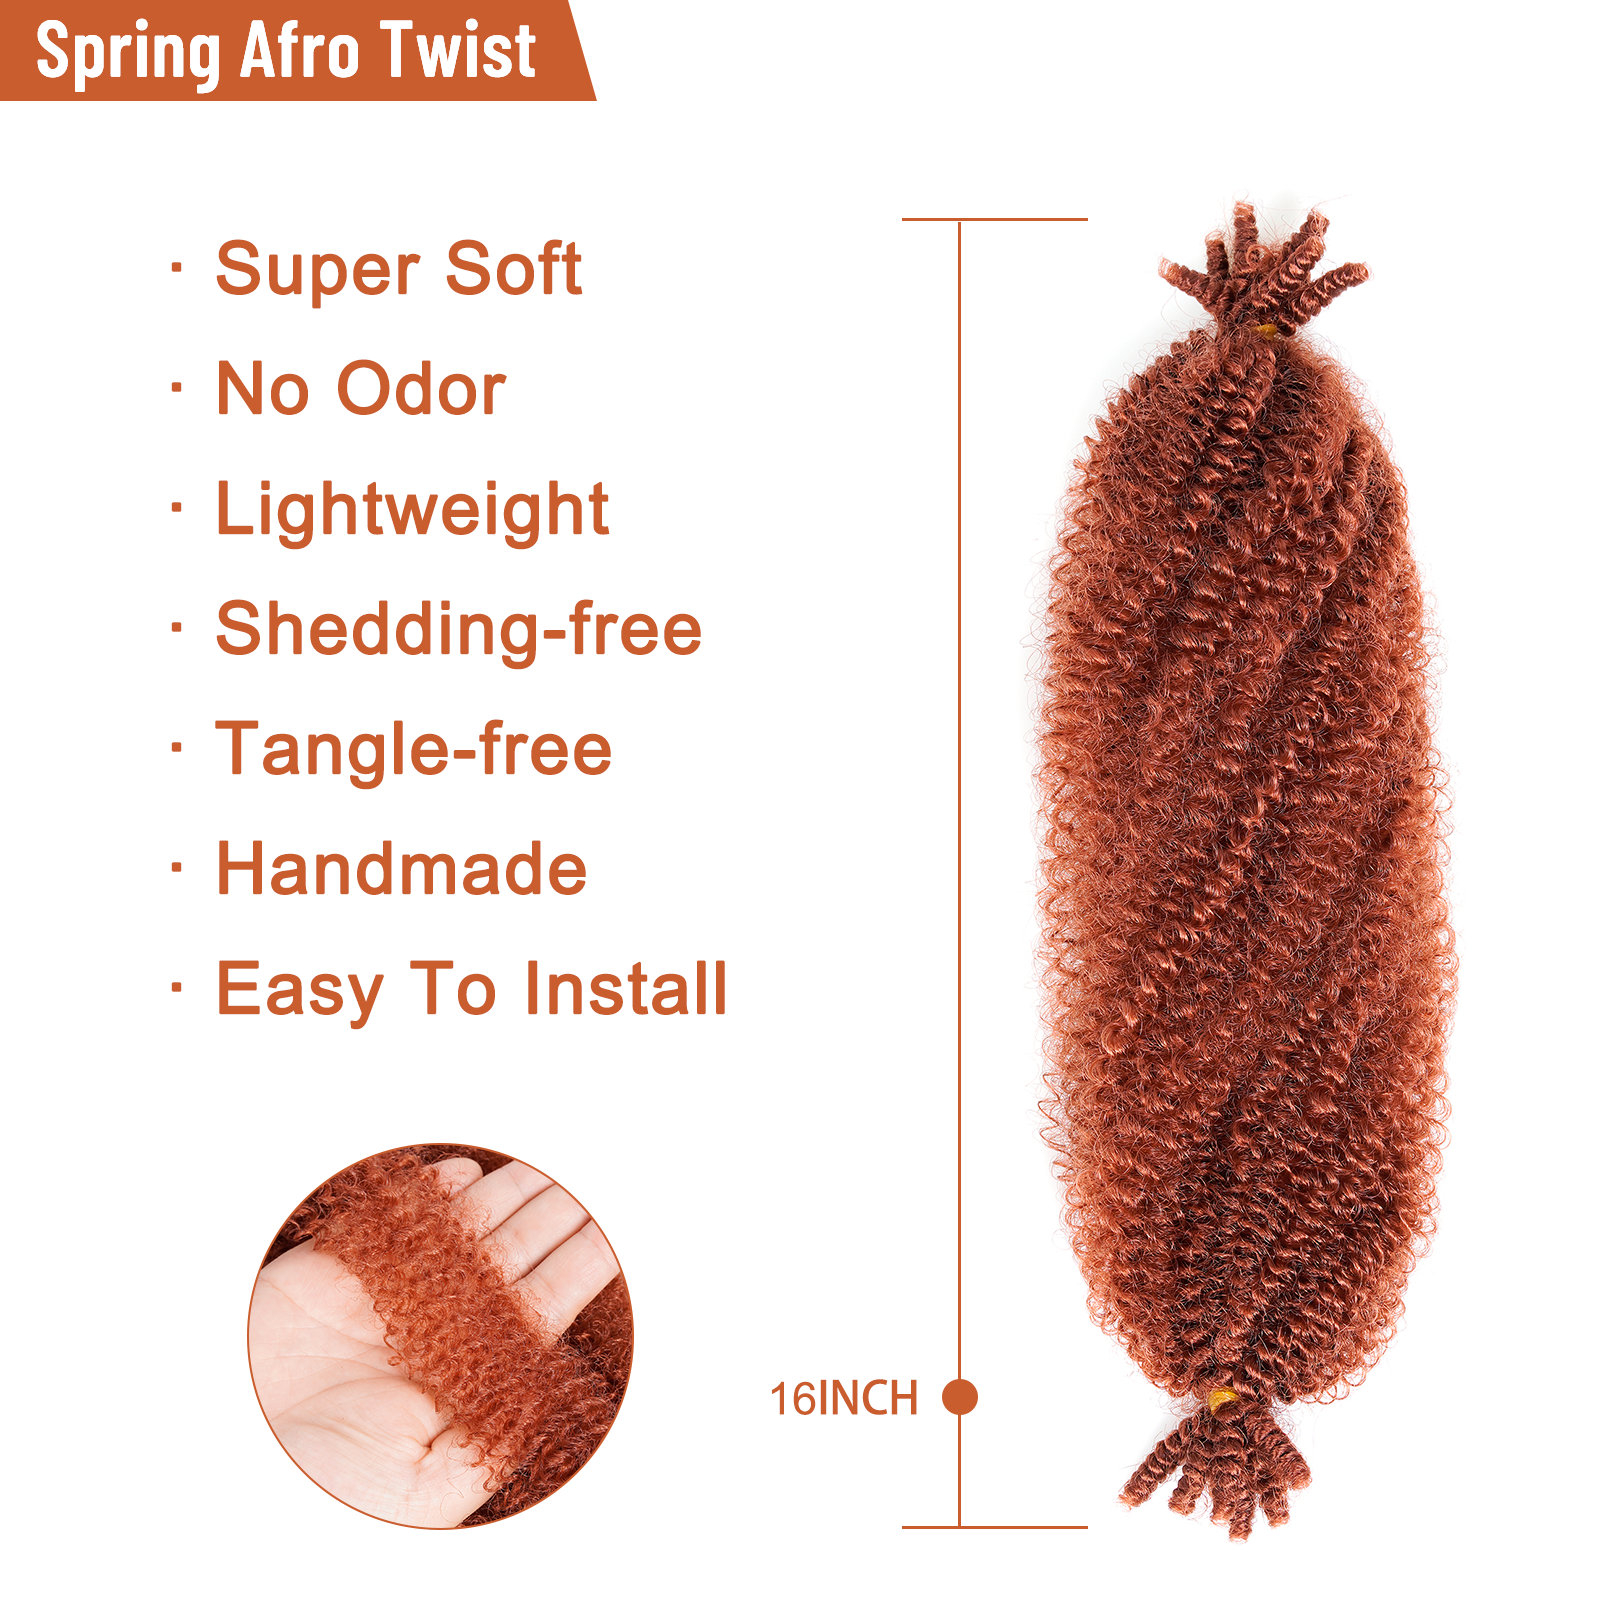 Springy Afro Twist Hair 16